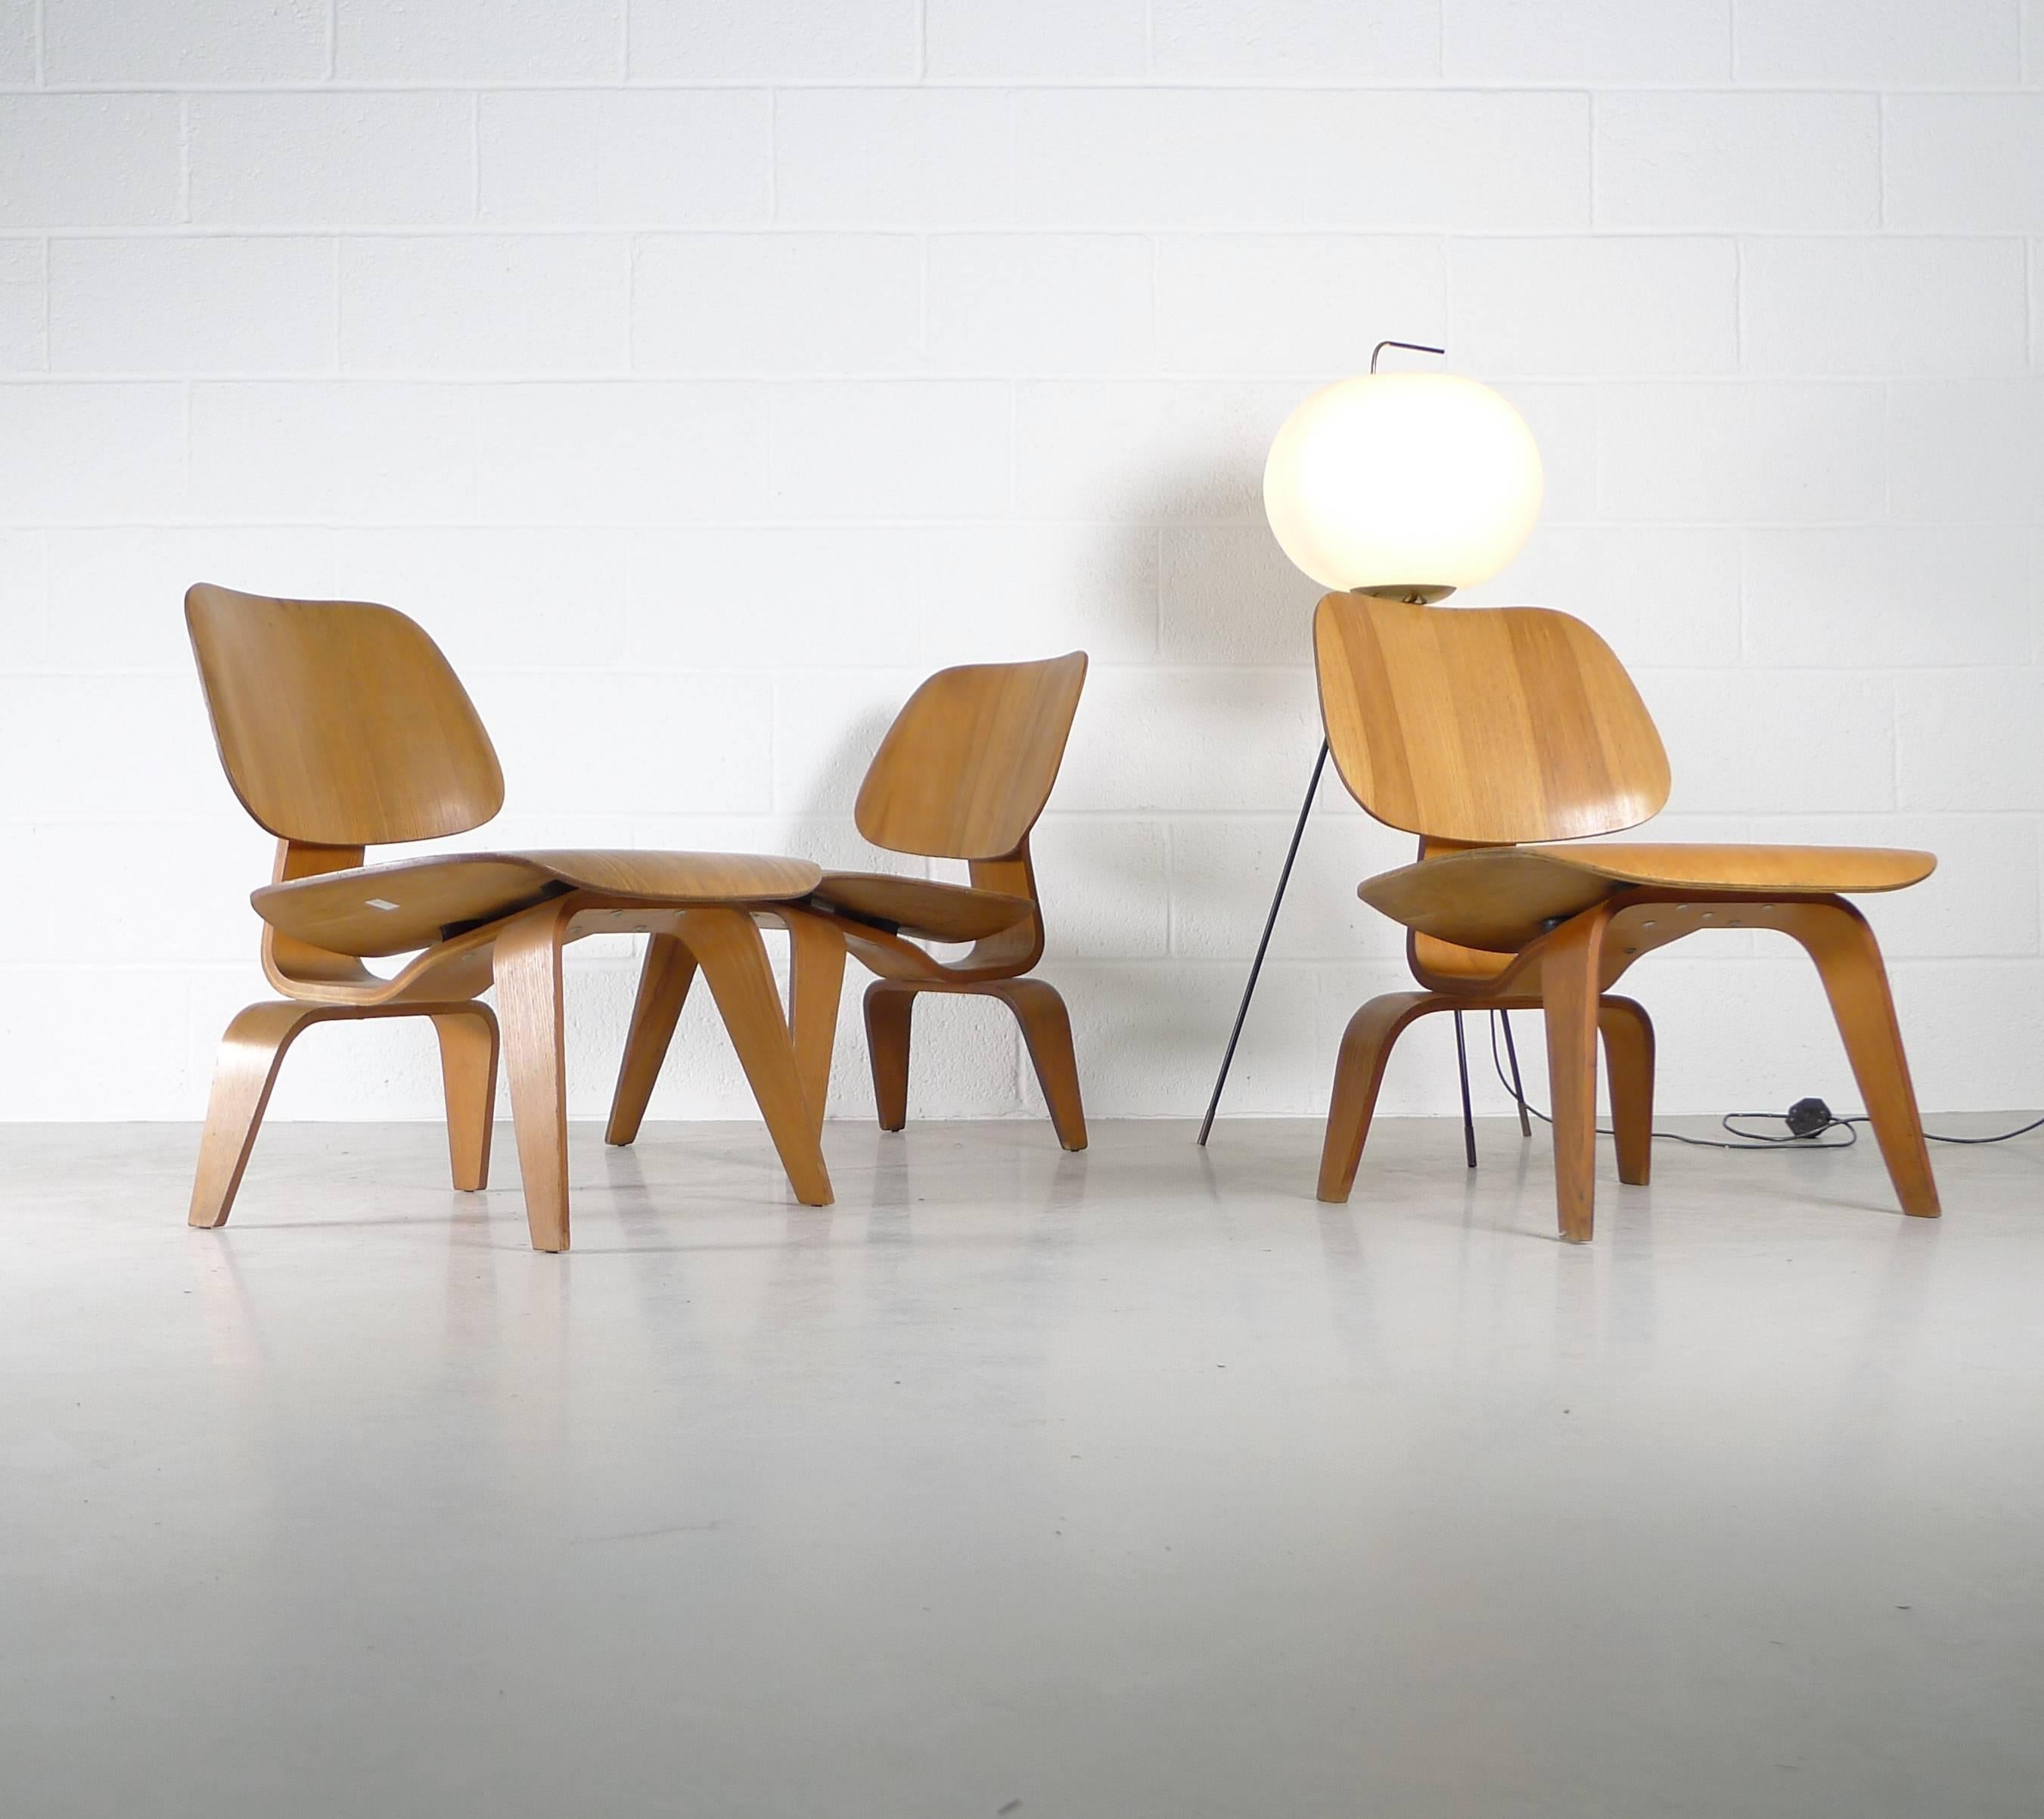 Charles and Ray Eames for Evans/Herman Miller, USA. An LCW (lounge chair wood) in ash. Currently three in stock, one has the earlier 5-2-5 screw pattern and likely dates, circa 1950, the other two have the 4-2-4 screw pattern and are circa